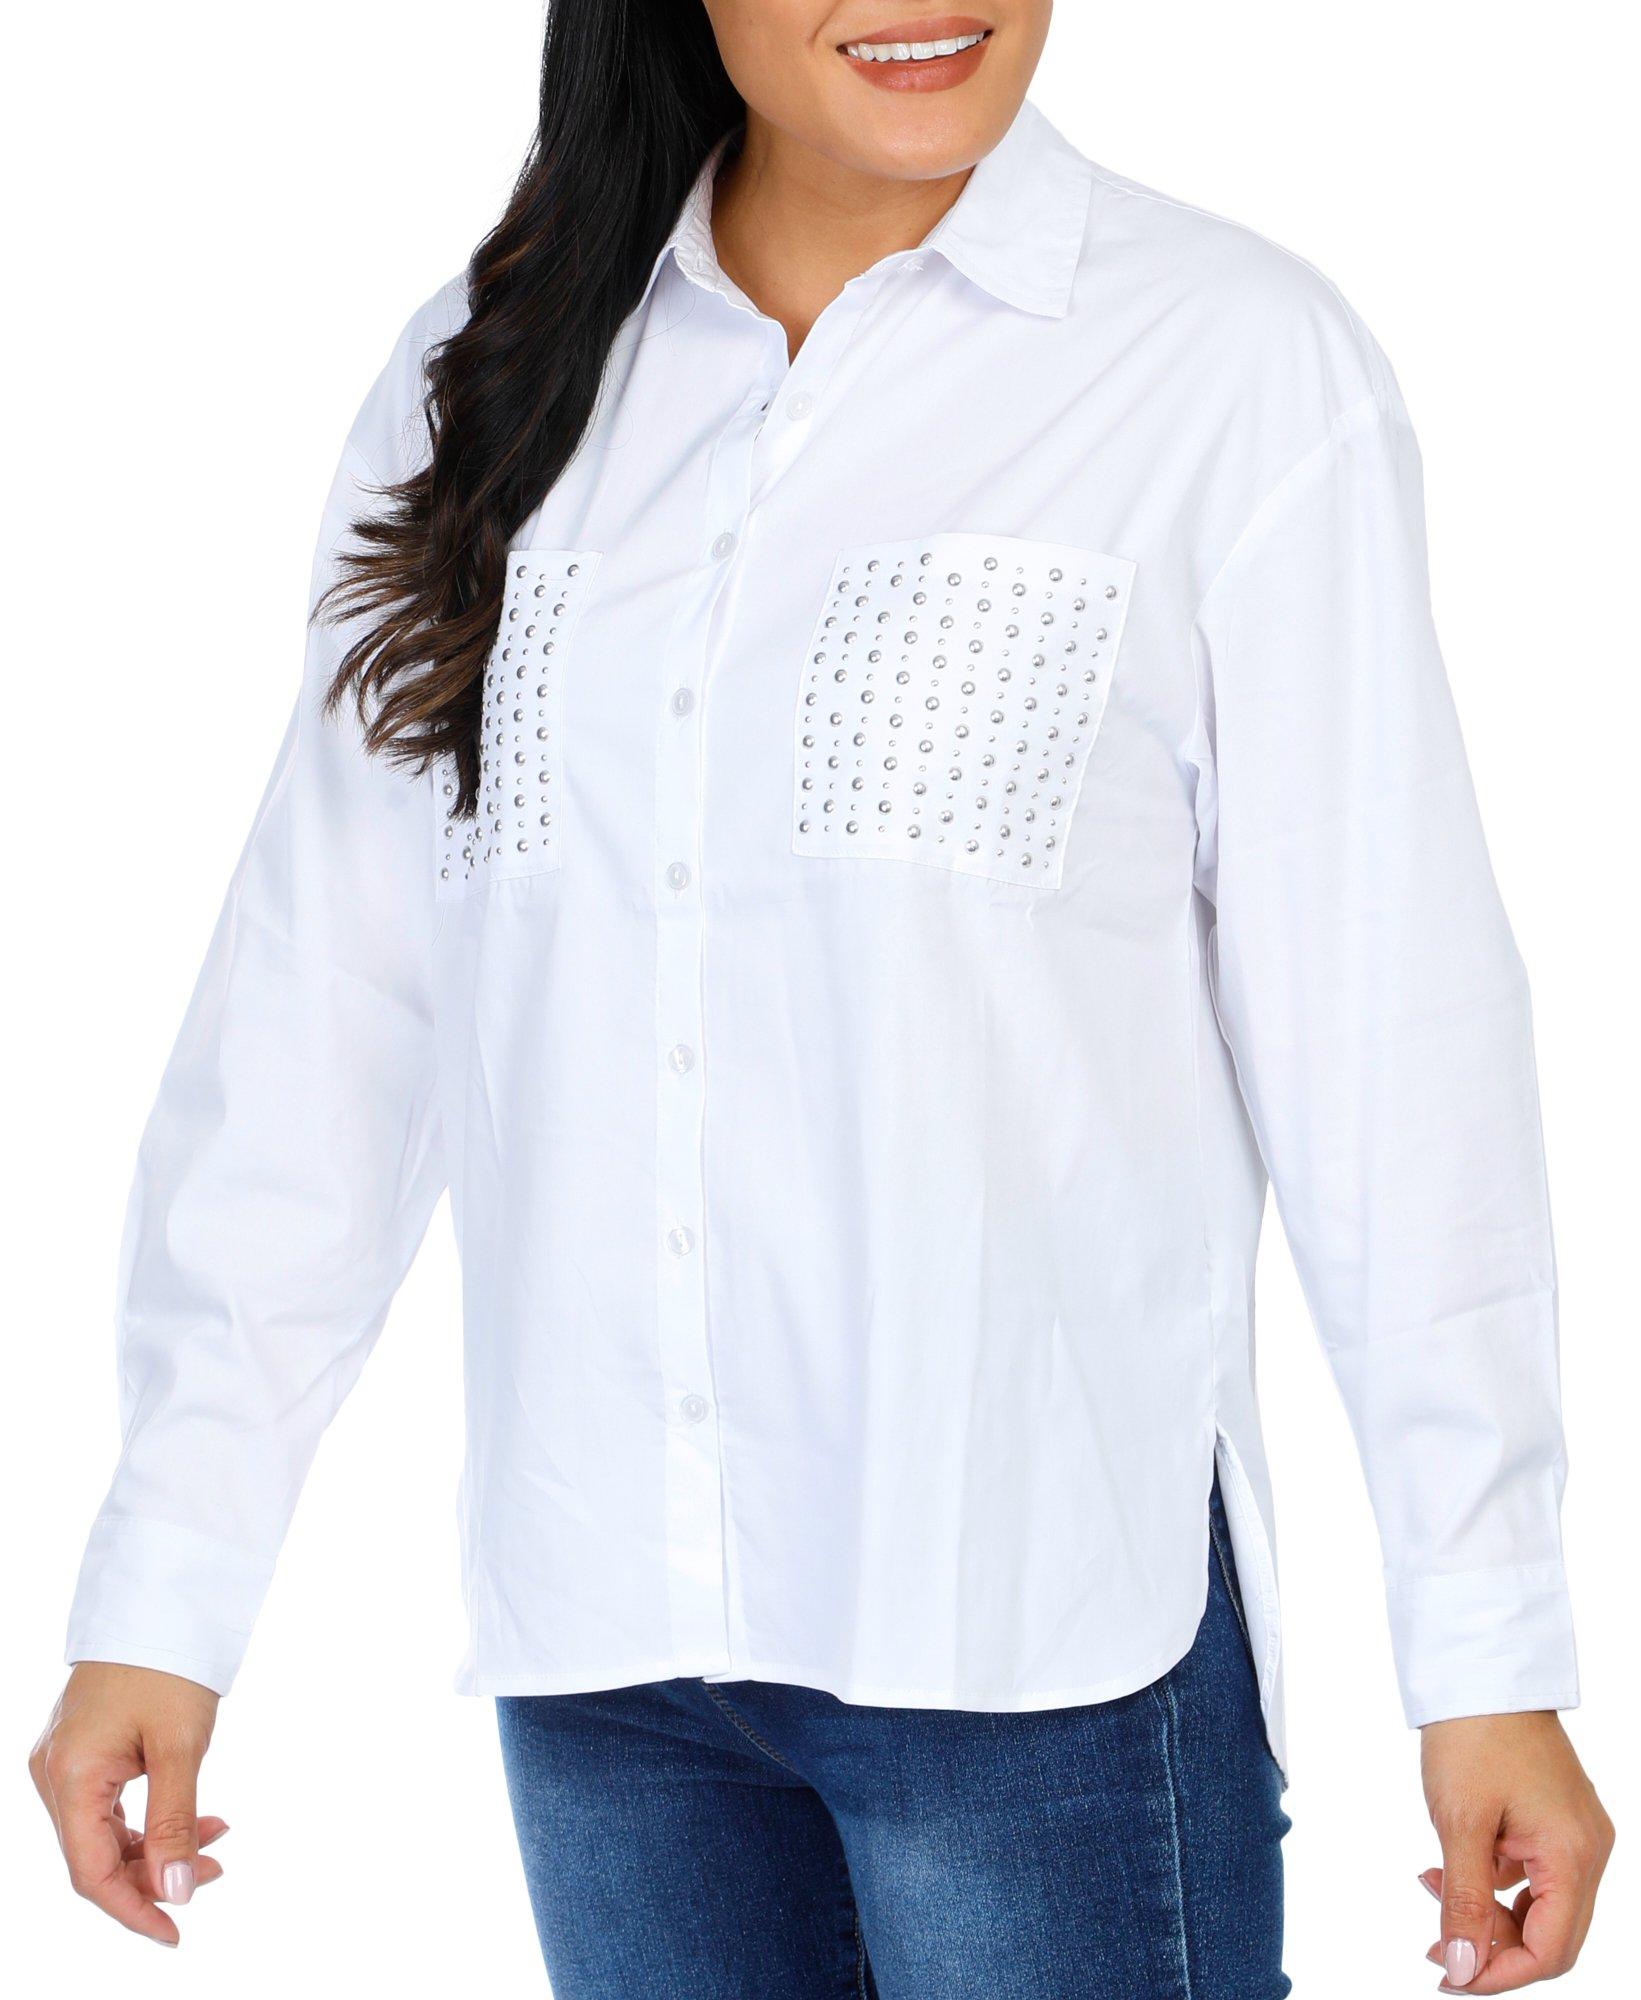 Women's Embellished Button Down Top